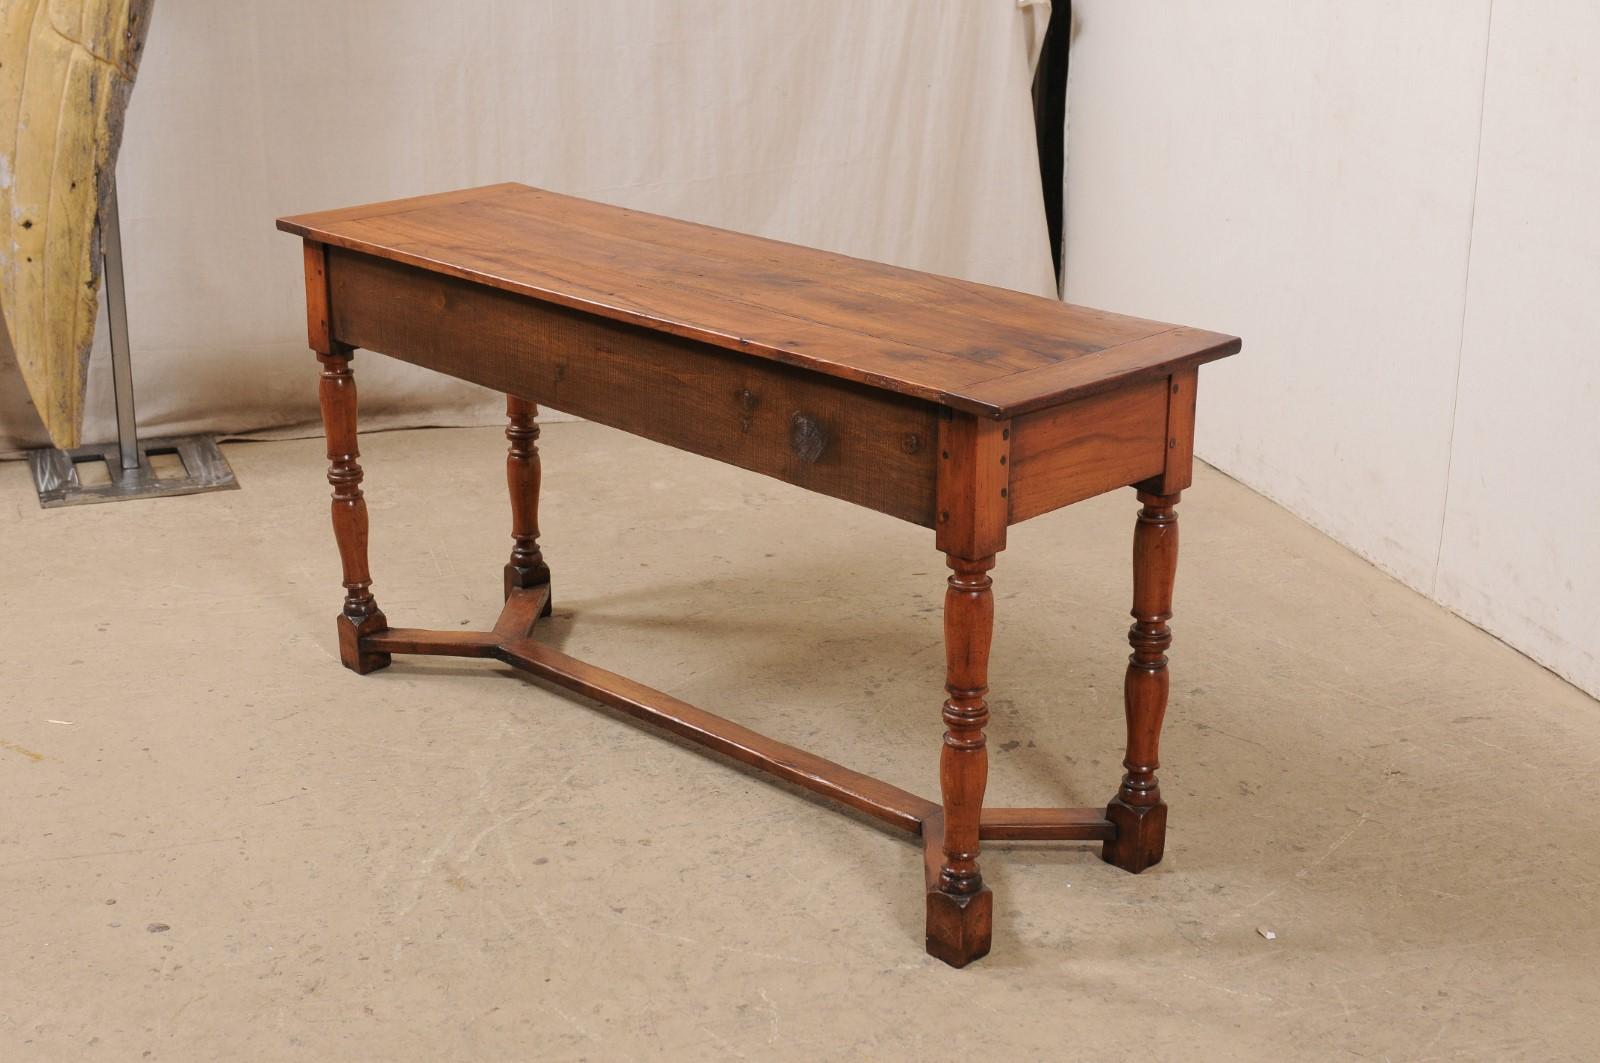 19th C. English Wooden Sofa or Console Table w/ 3 Drawers and Nicely Turned Legs 6